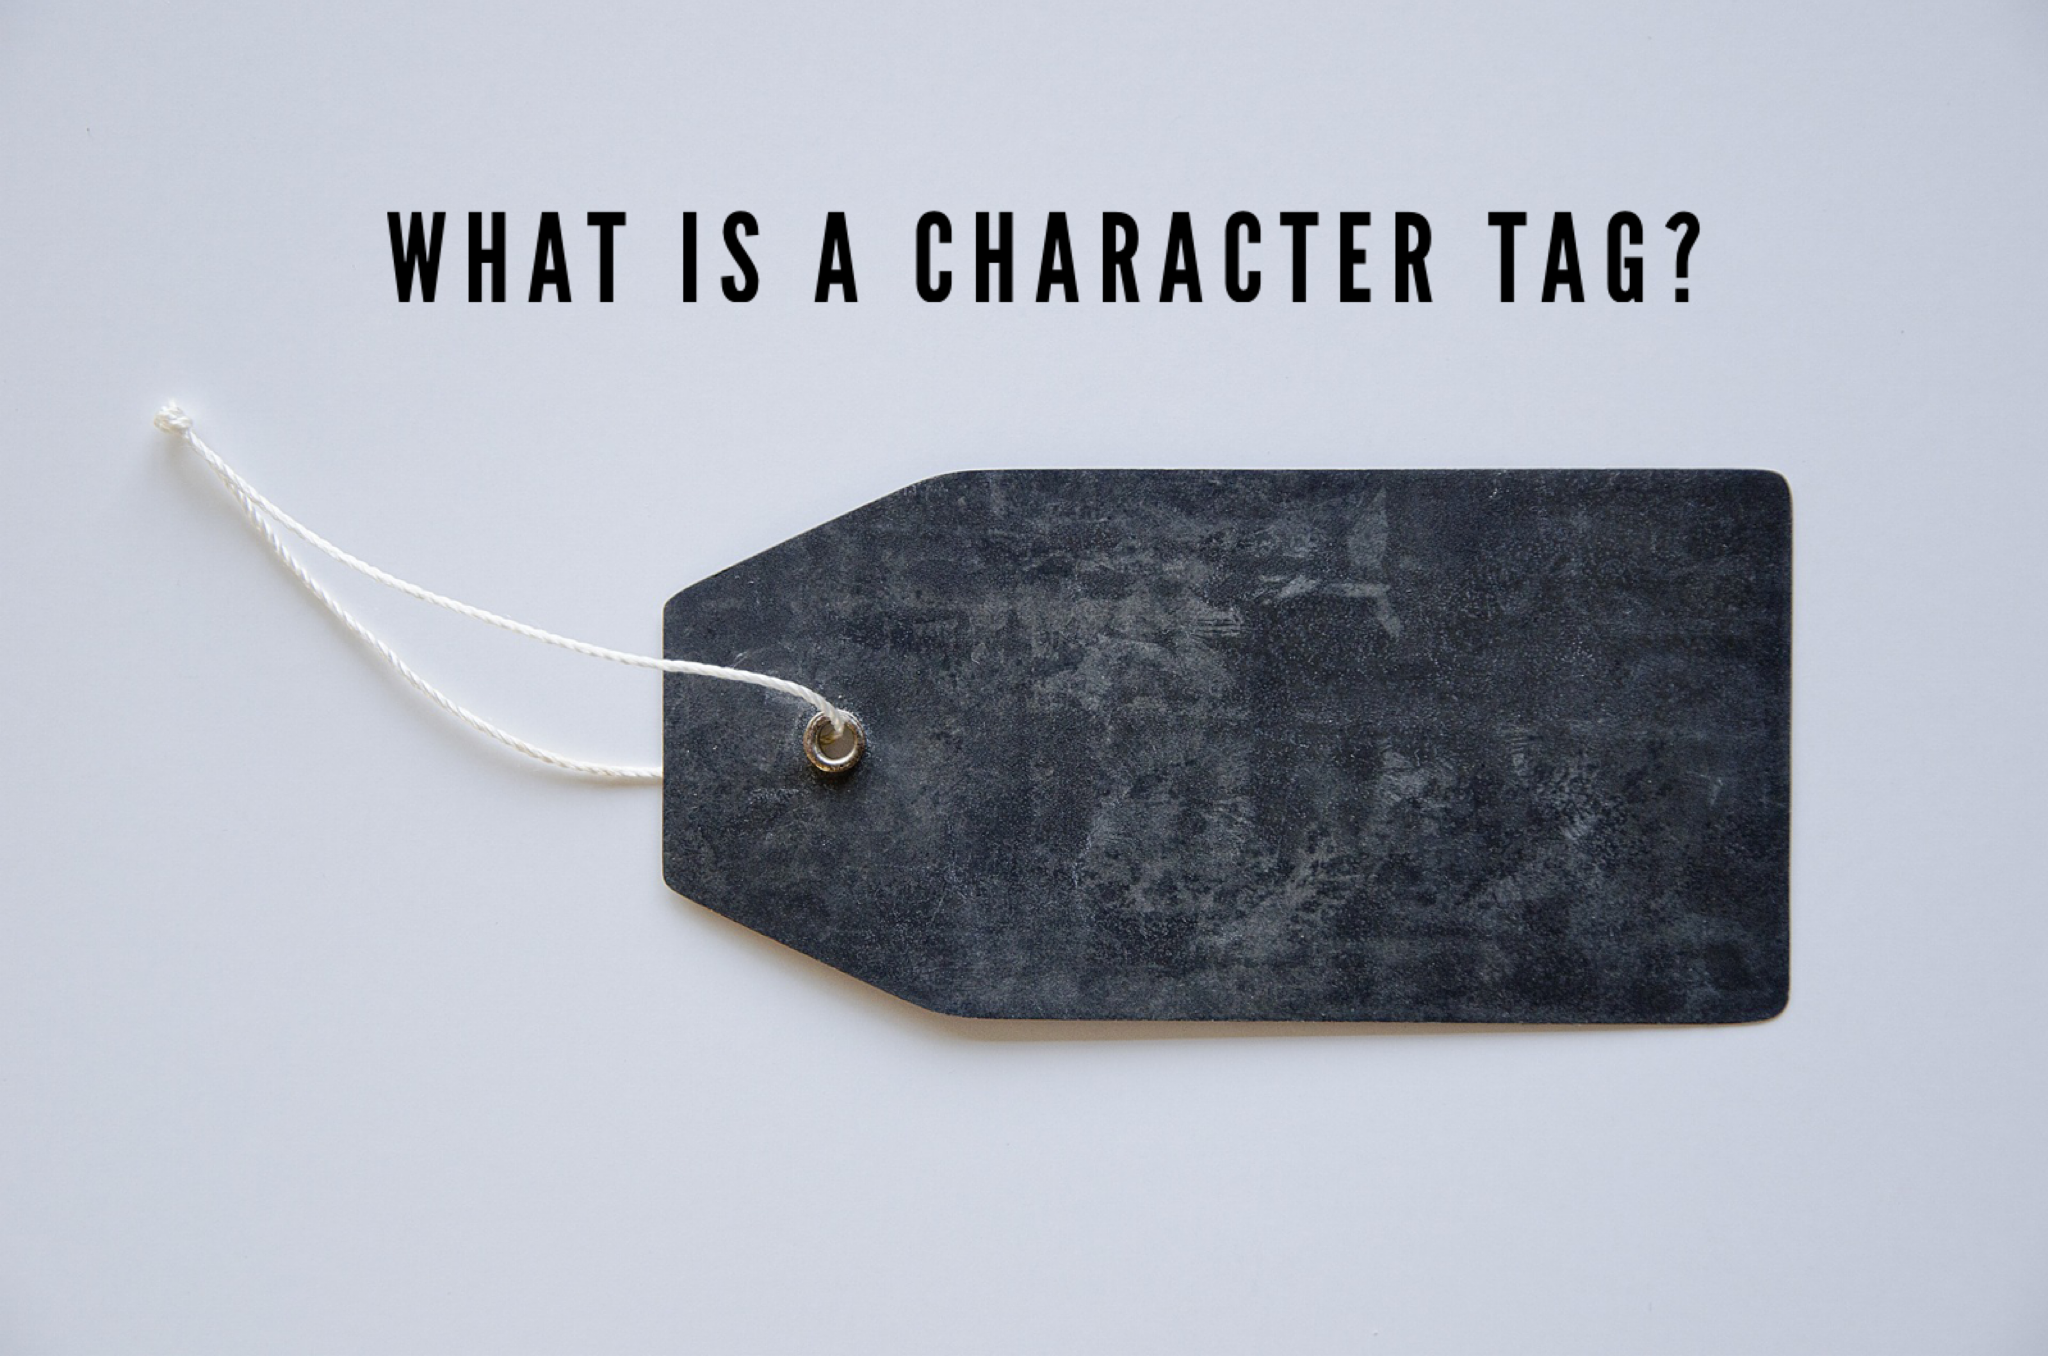 What is the meaning of  tag and stuff? ( is it the name of a